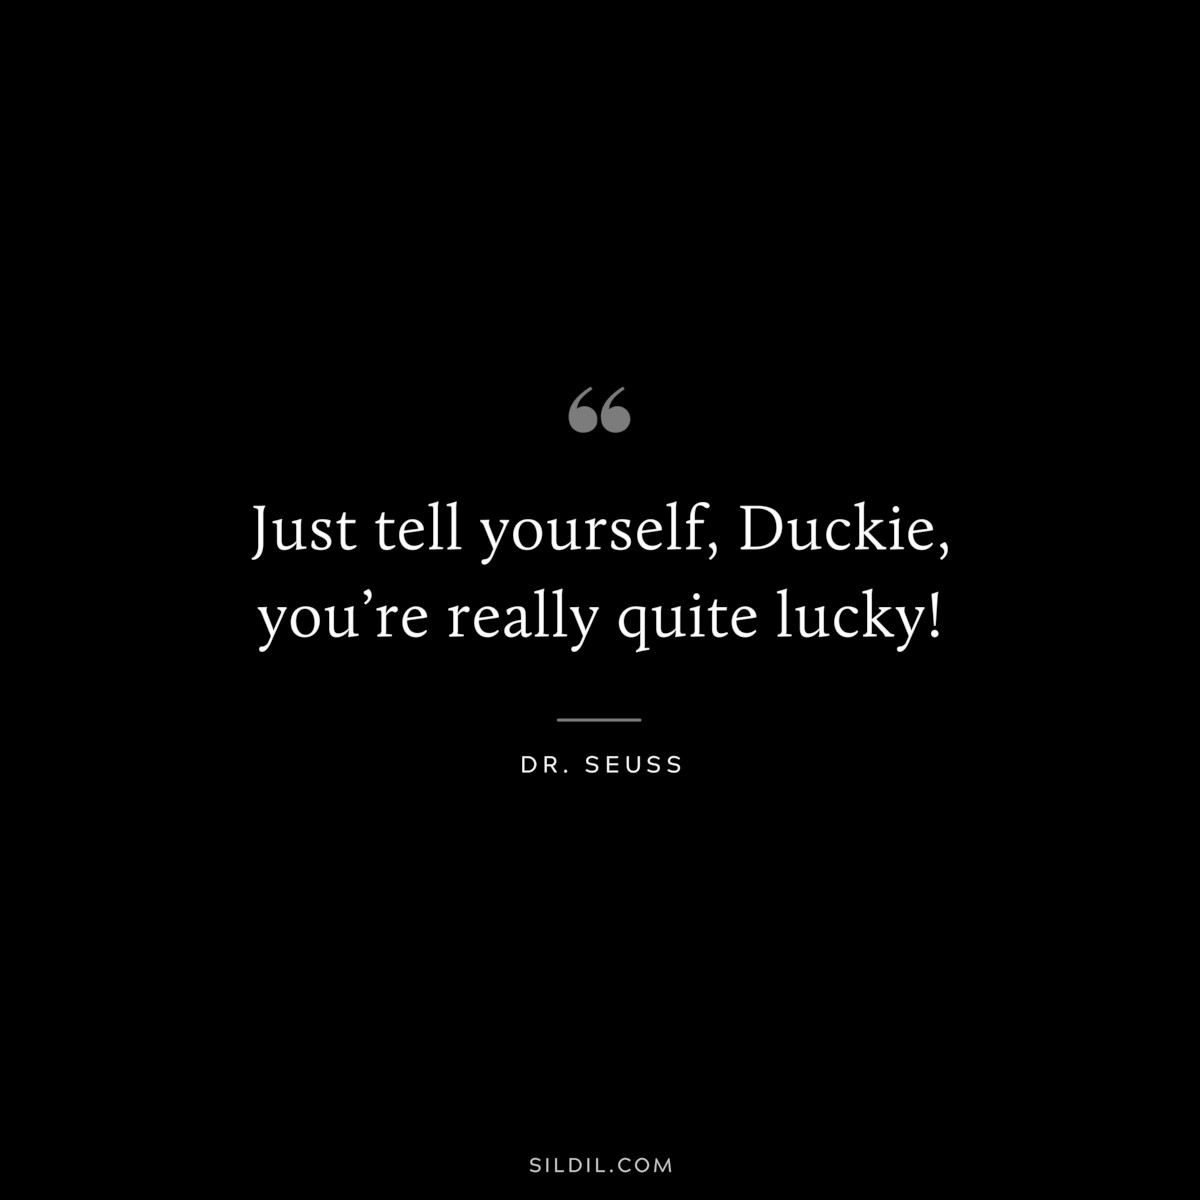 Just tell yourself, Duckie, you’re really quite lucky! ― Dr. Seuss